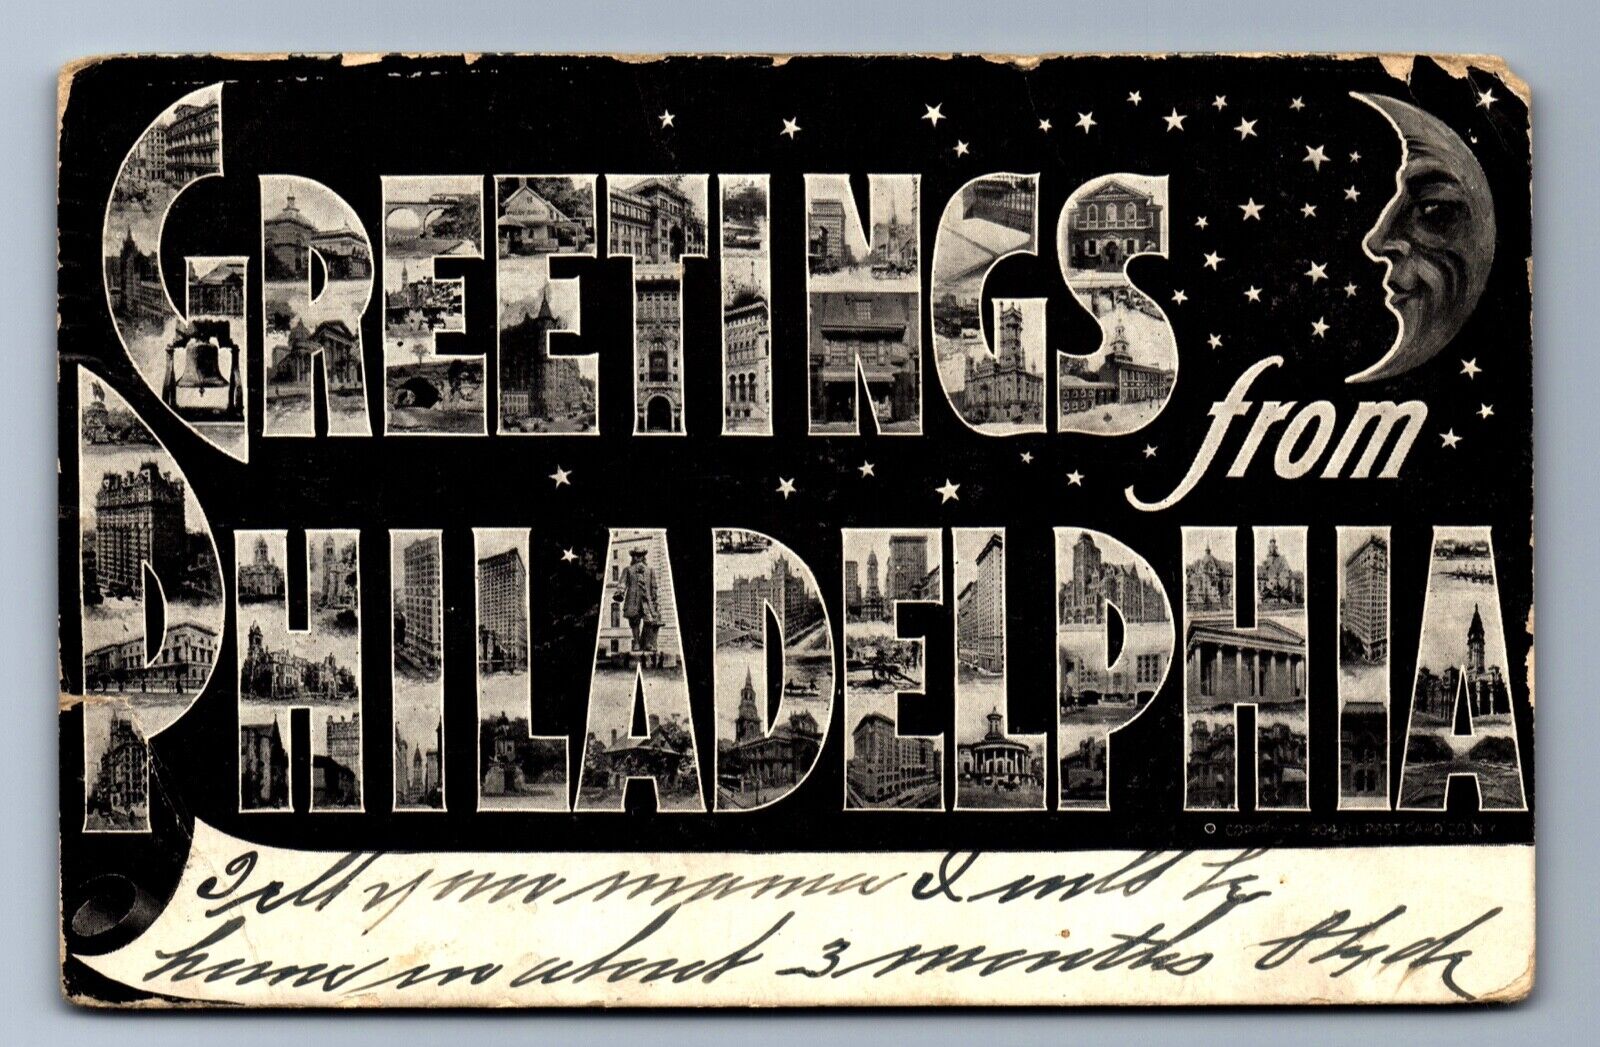 1906 LARGE LETTER PHILADELPHIA, PA, FACE IN MOON GREETING Postcard P23